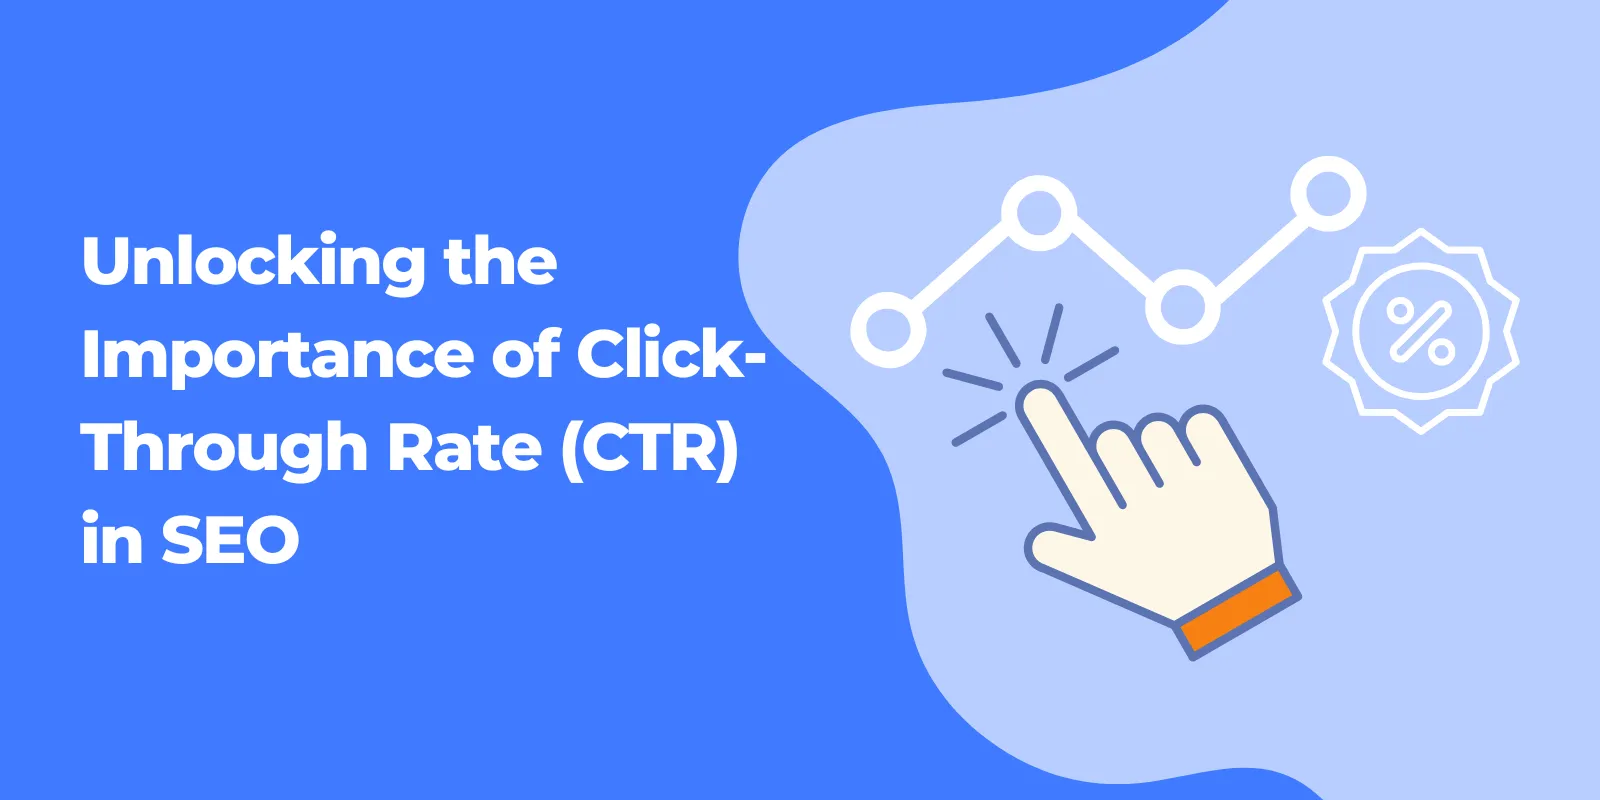 Unlocking-the-Importance-of-Click-Through-Rate-CTR-in-SEO